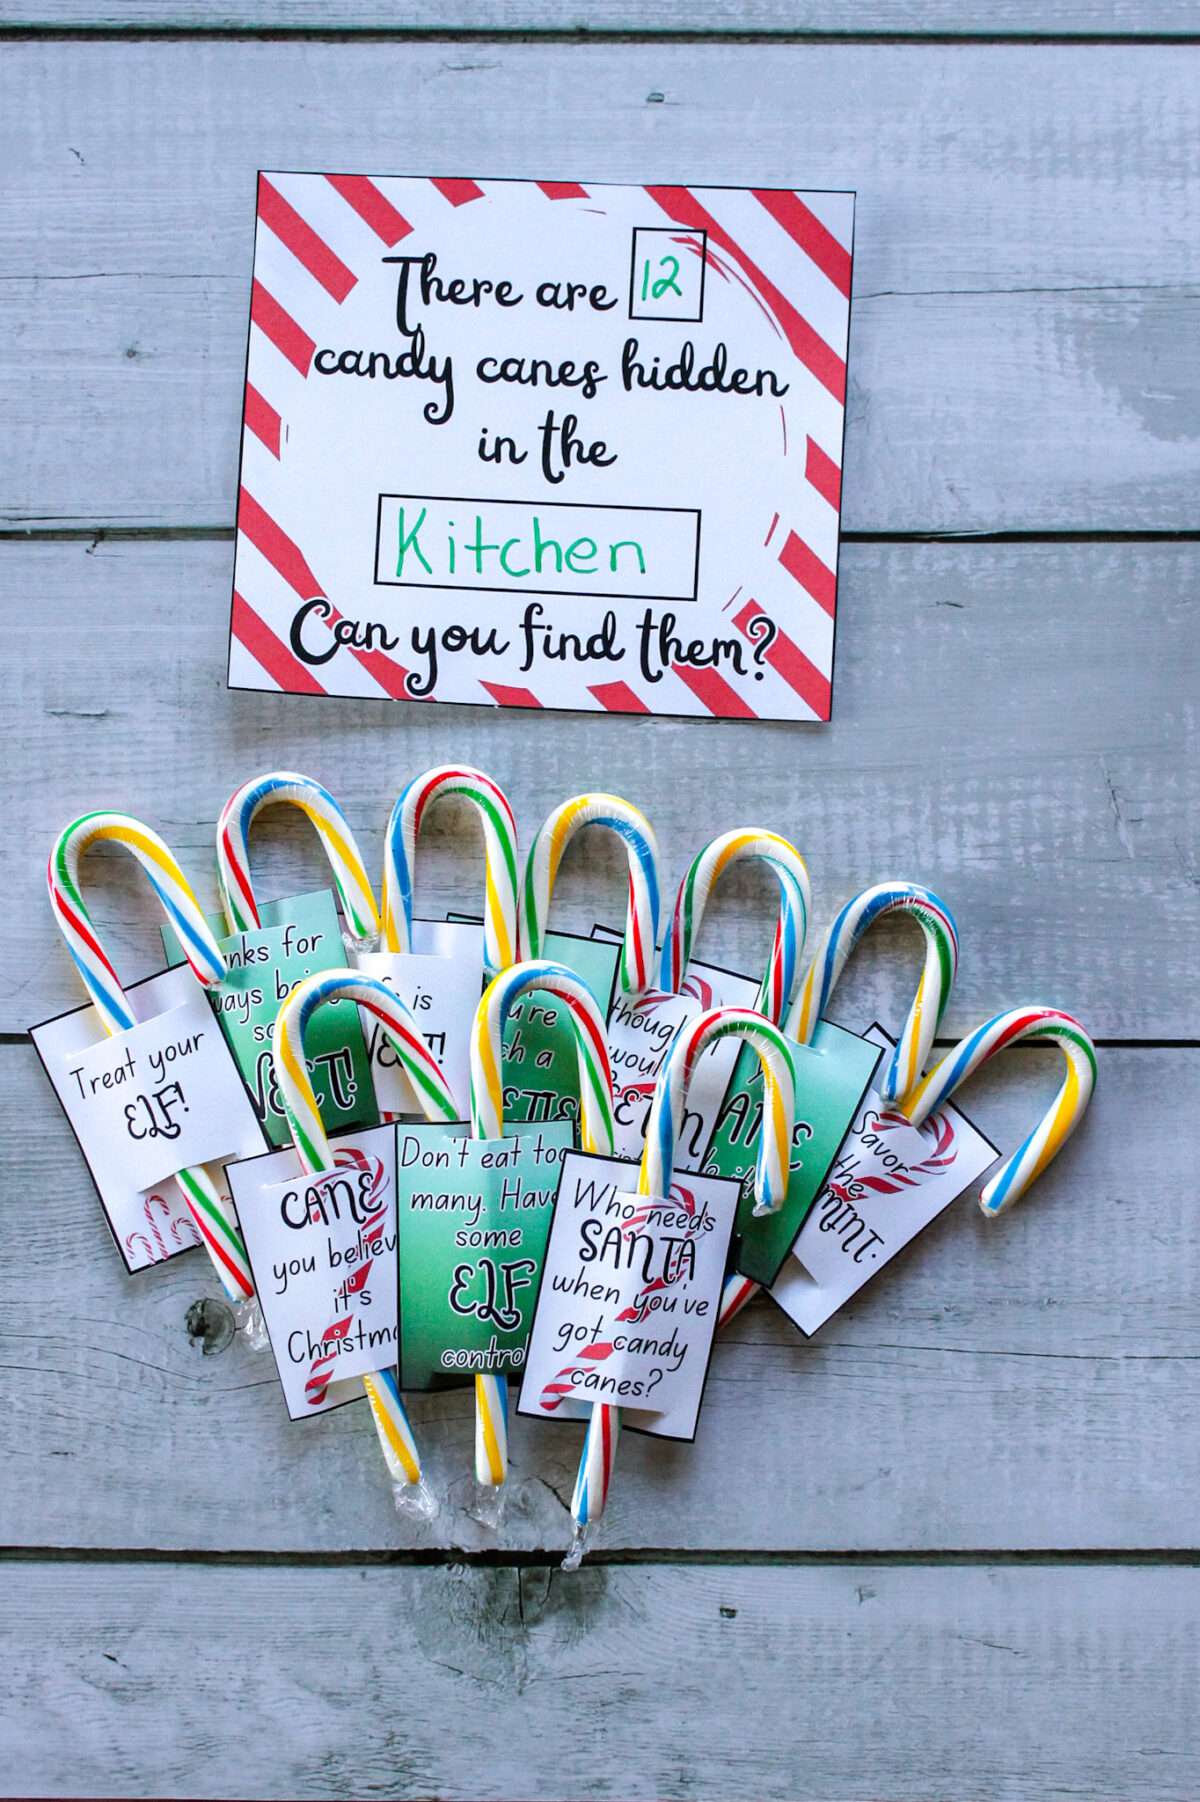 Candy canes with tags attached